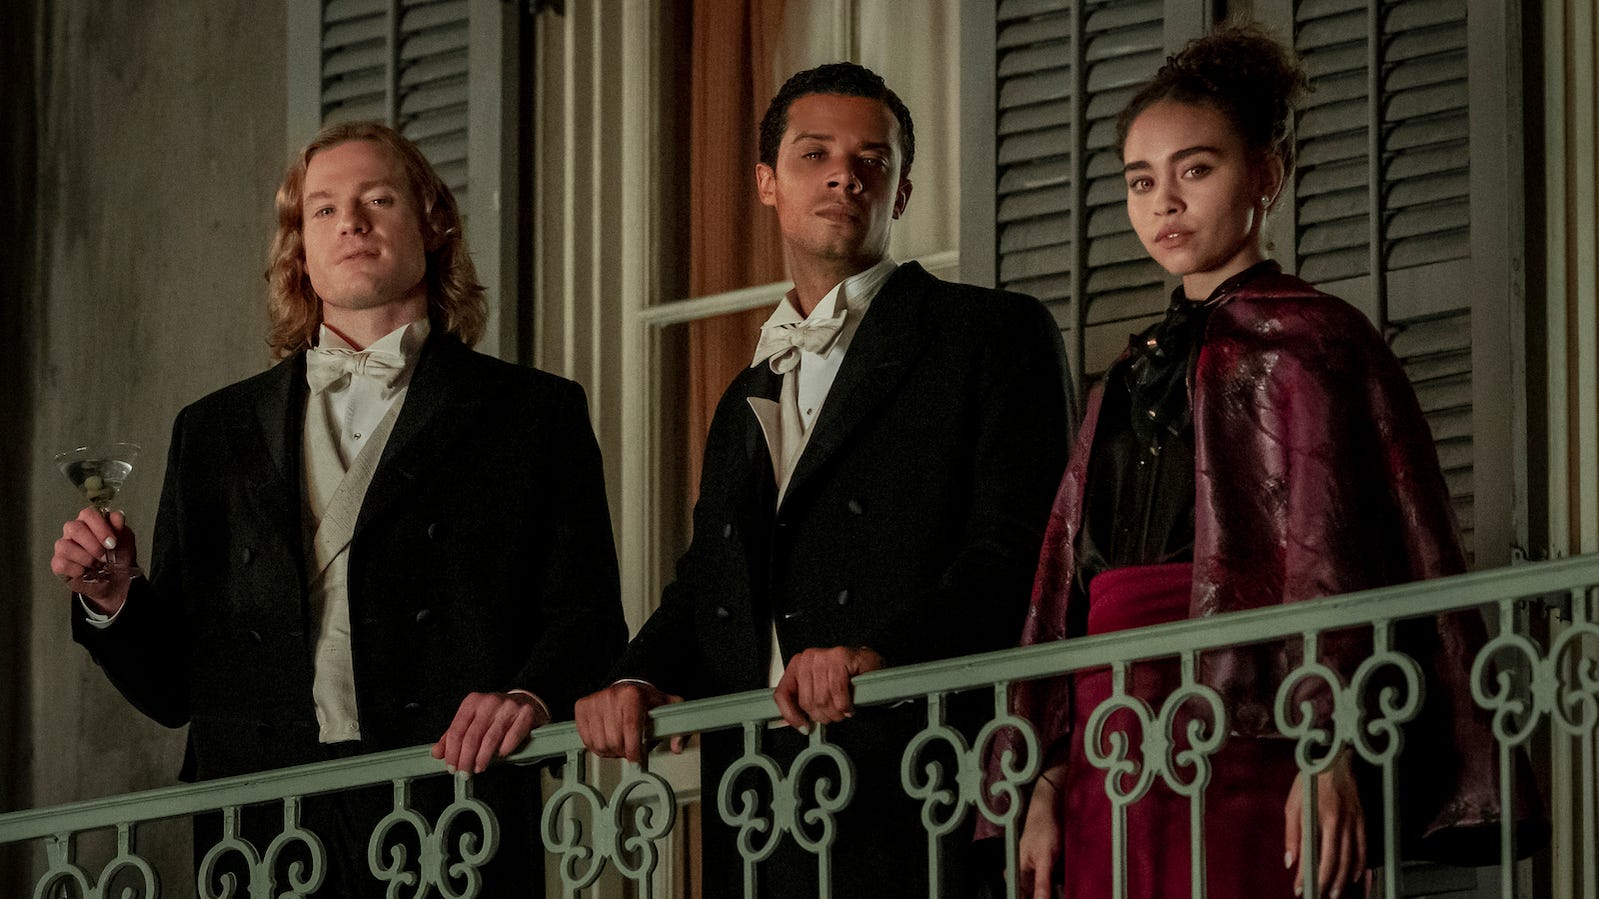 Sam Reid, Jacob Anderson, and Bailey Bass, Interview with the Vampire